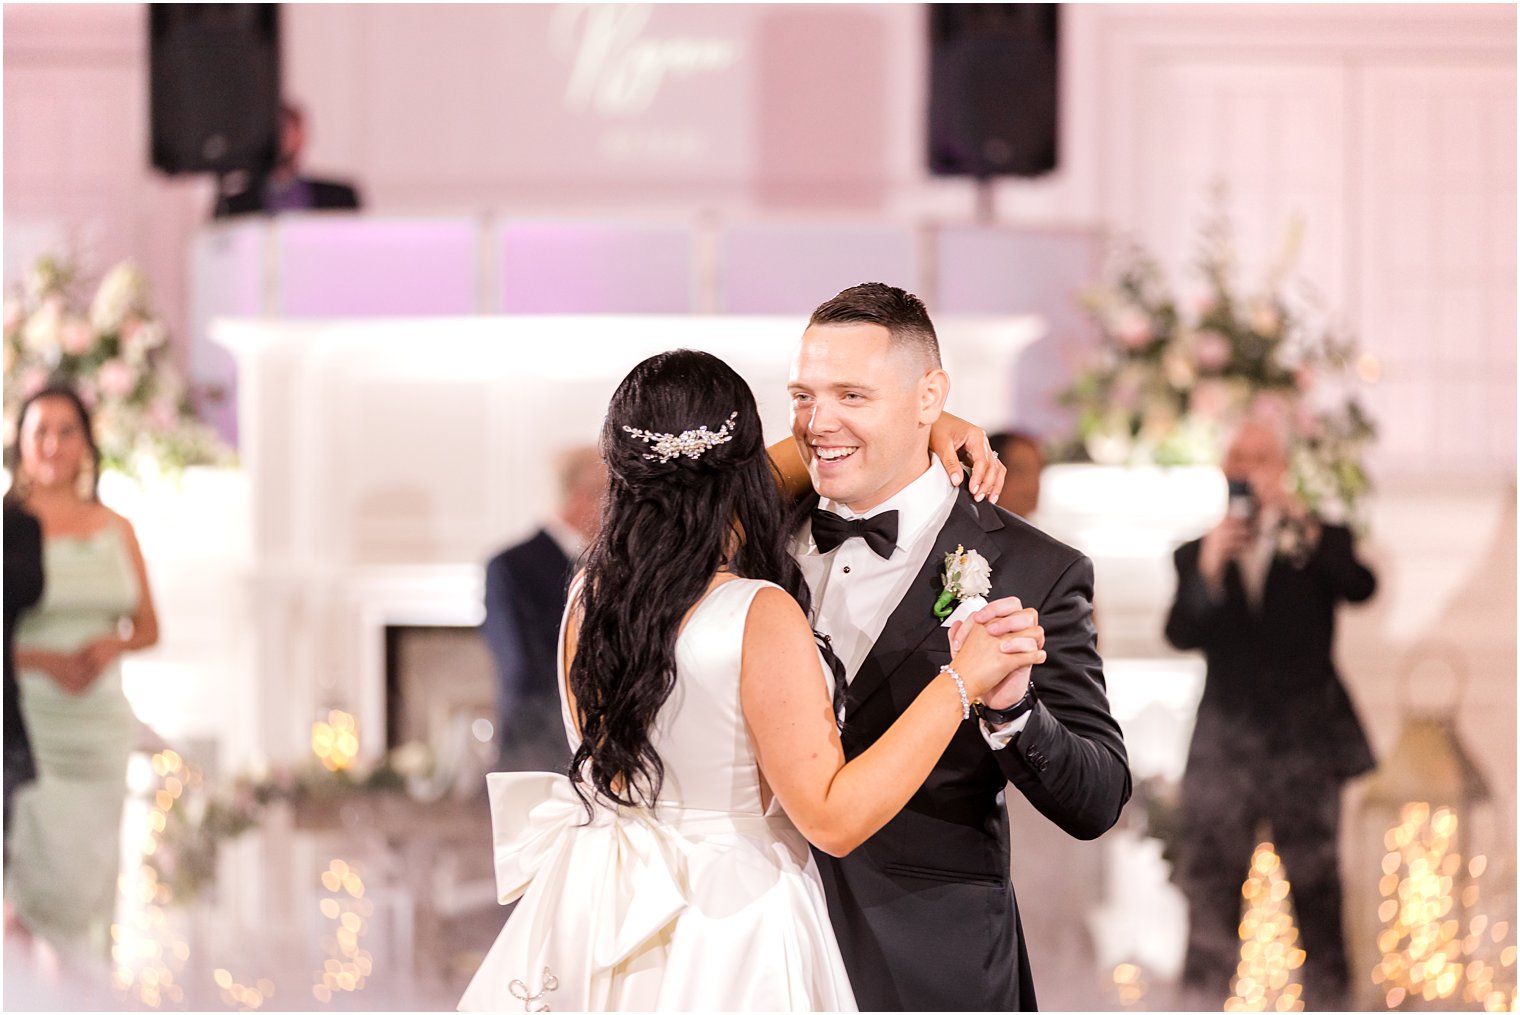 groom dances with bride during wedding reception in New Jersey